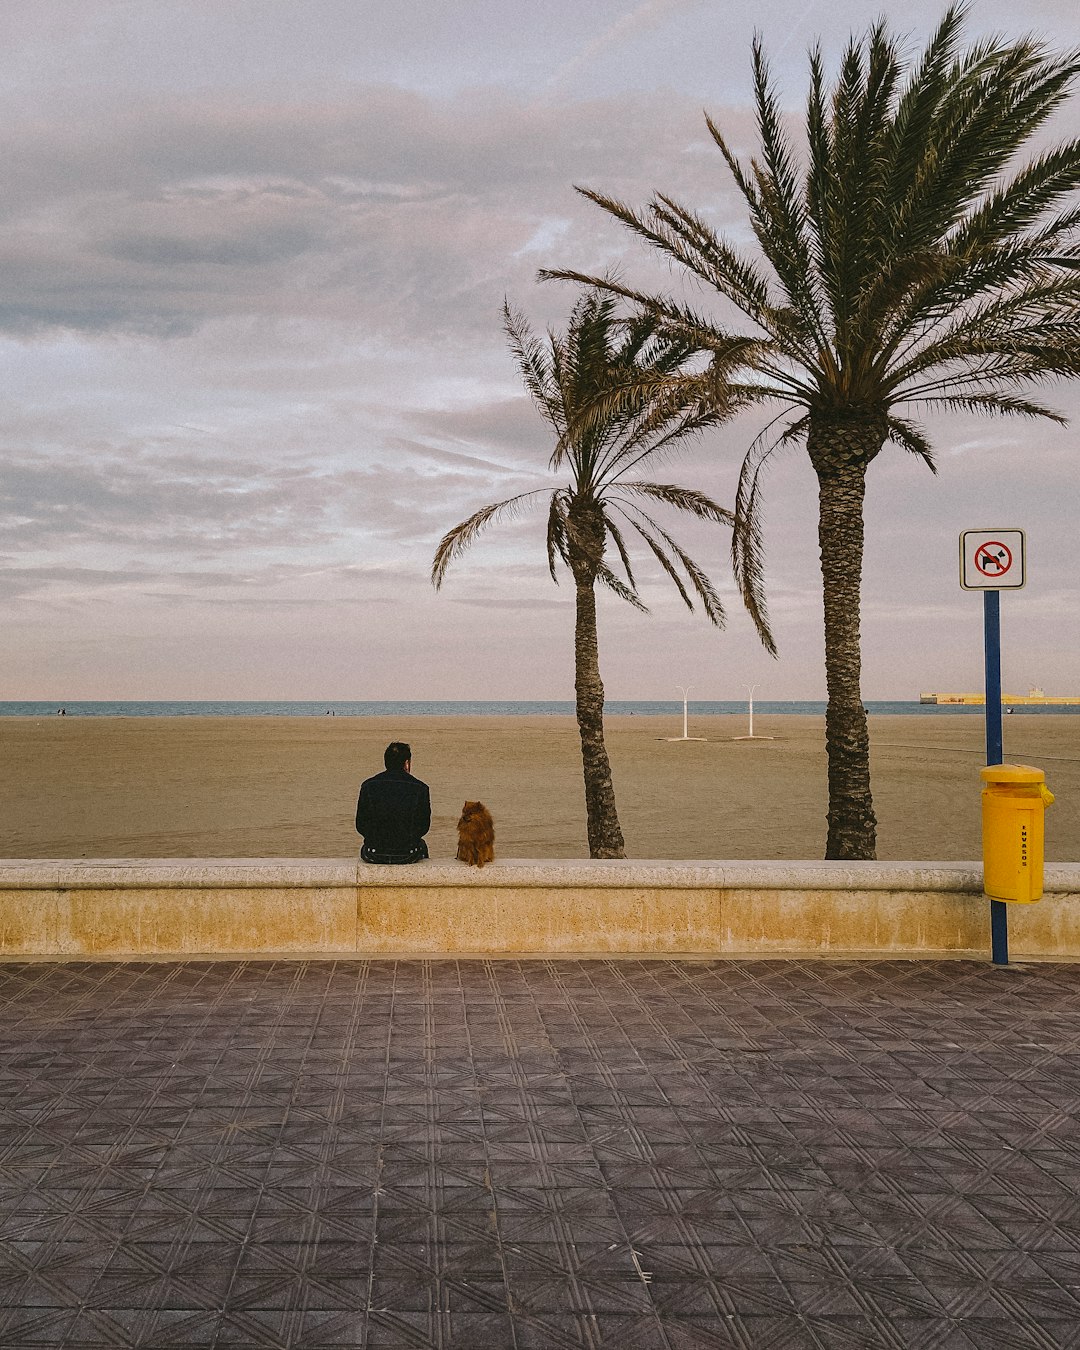 man in black jacket sitting on yellow bench near body of water during daytime